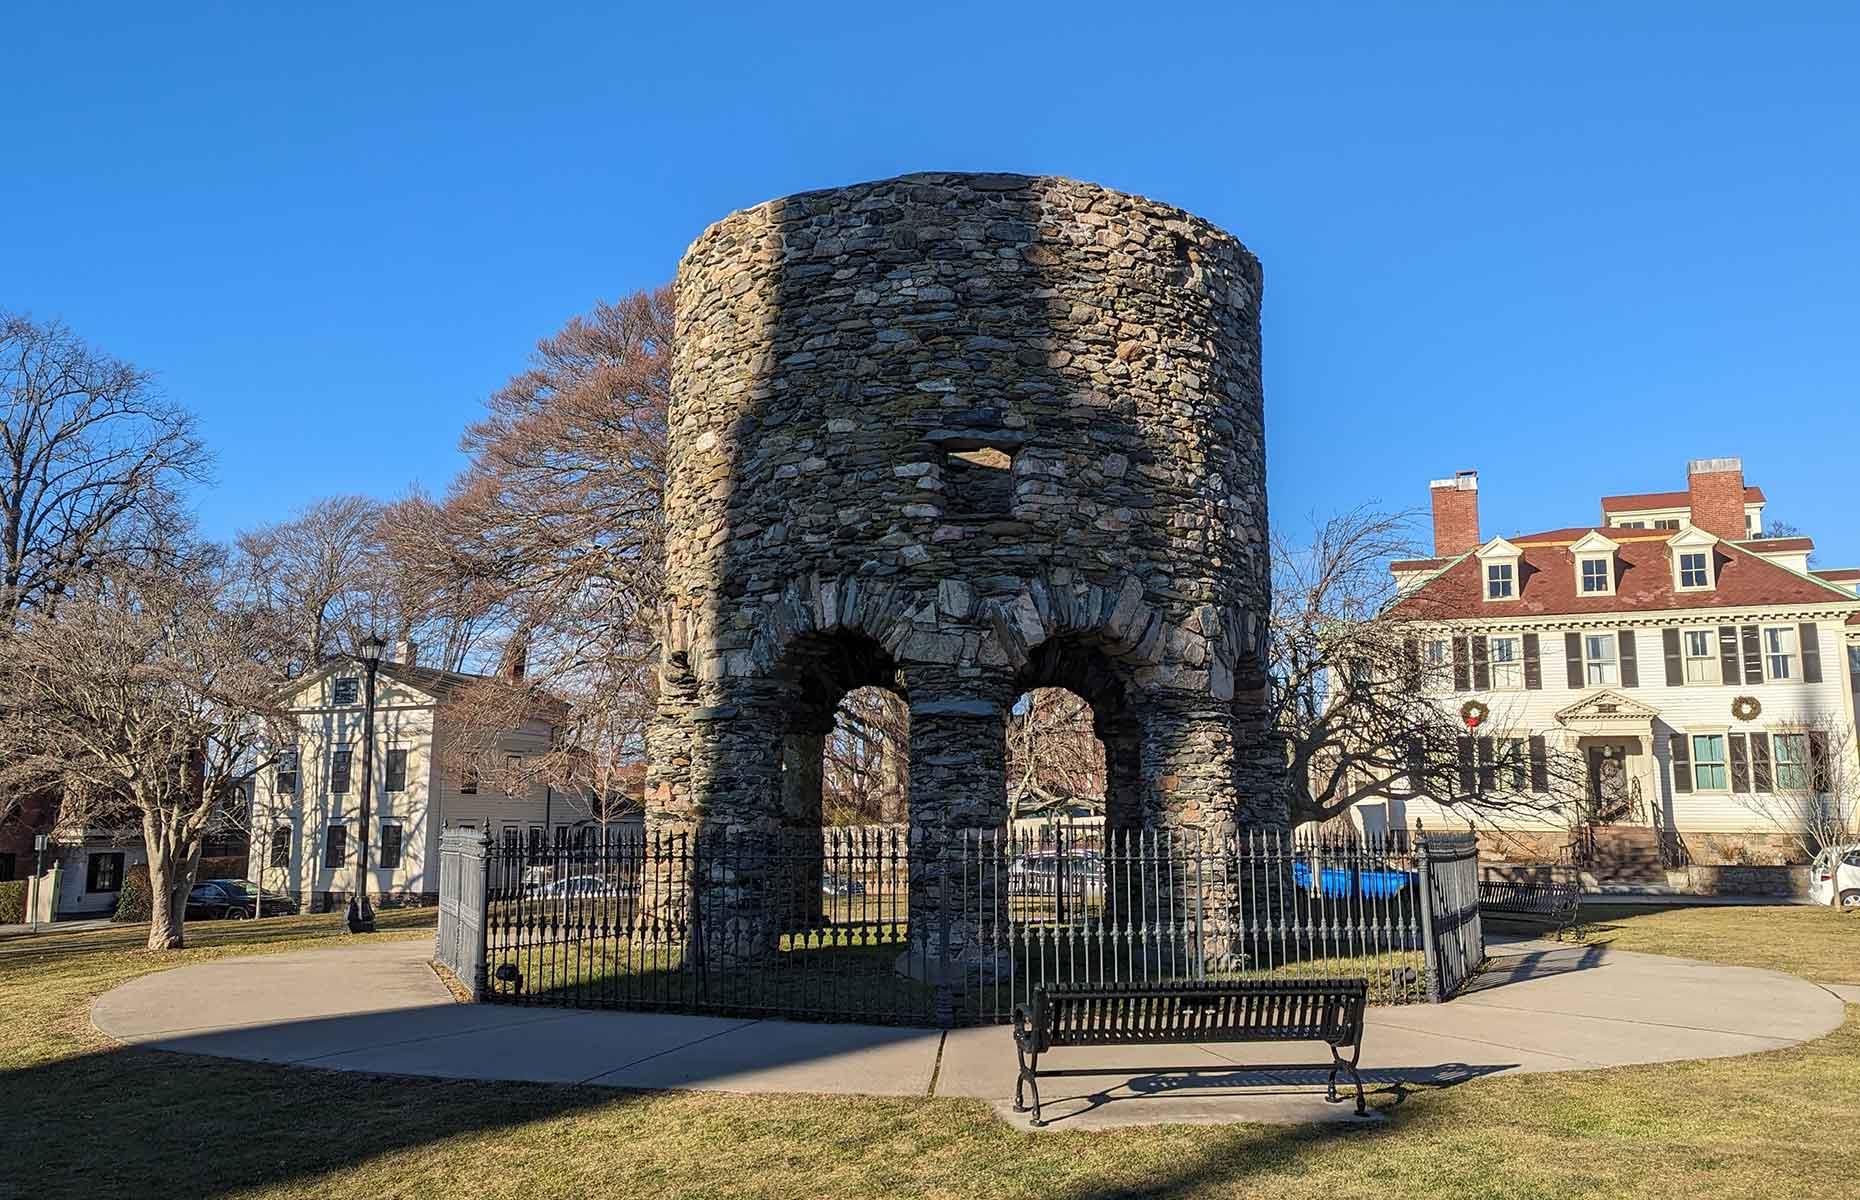 <p>Will we ever solve the mystery of who built Newport Tower? Generally accepted to have been constructed <a href="https://locationsoflore.com/2018/11/21/the-enigmatic-origins-of-the-newport-tower/">as a windmill</a> in the 17th century (parts of the structure were radiocarbon-dated to 1635-1698), there are also theories that it could be of Portuguese, Scottish, Chinese or even Viking origin. Several astronomical alignments add to the mystery too. Visit the structure and <a href="http://newporttowermuseum.com/">Newport Tower Museum</a> in Touro Park to decide for yourself…</p>  <p><strong><a href="https://www.loveexploring.com/galleries/163256/viking-invasion-surprising-faraway-places-they-travelled-to?page=1">See the surprising places the Vikings traveled to</a></strong></p>